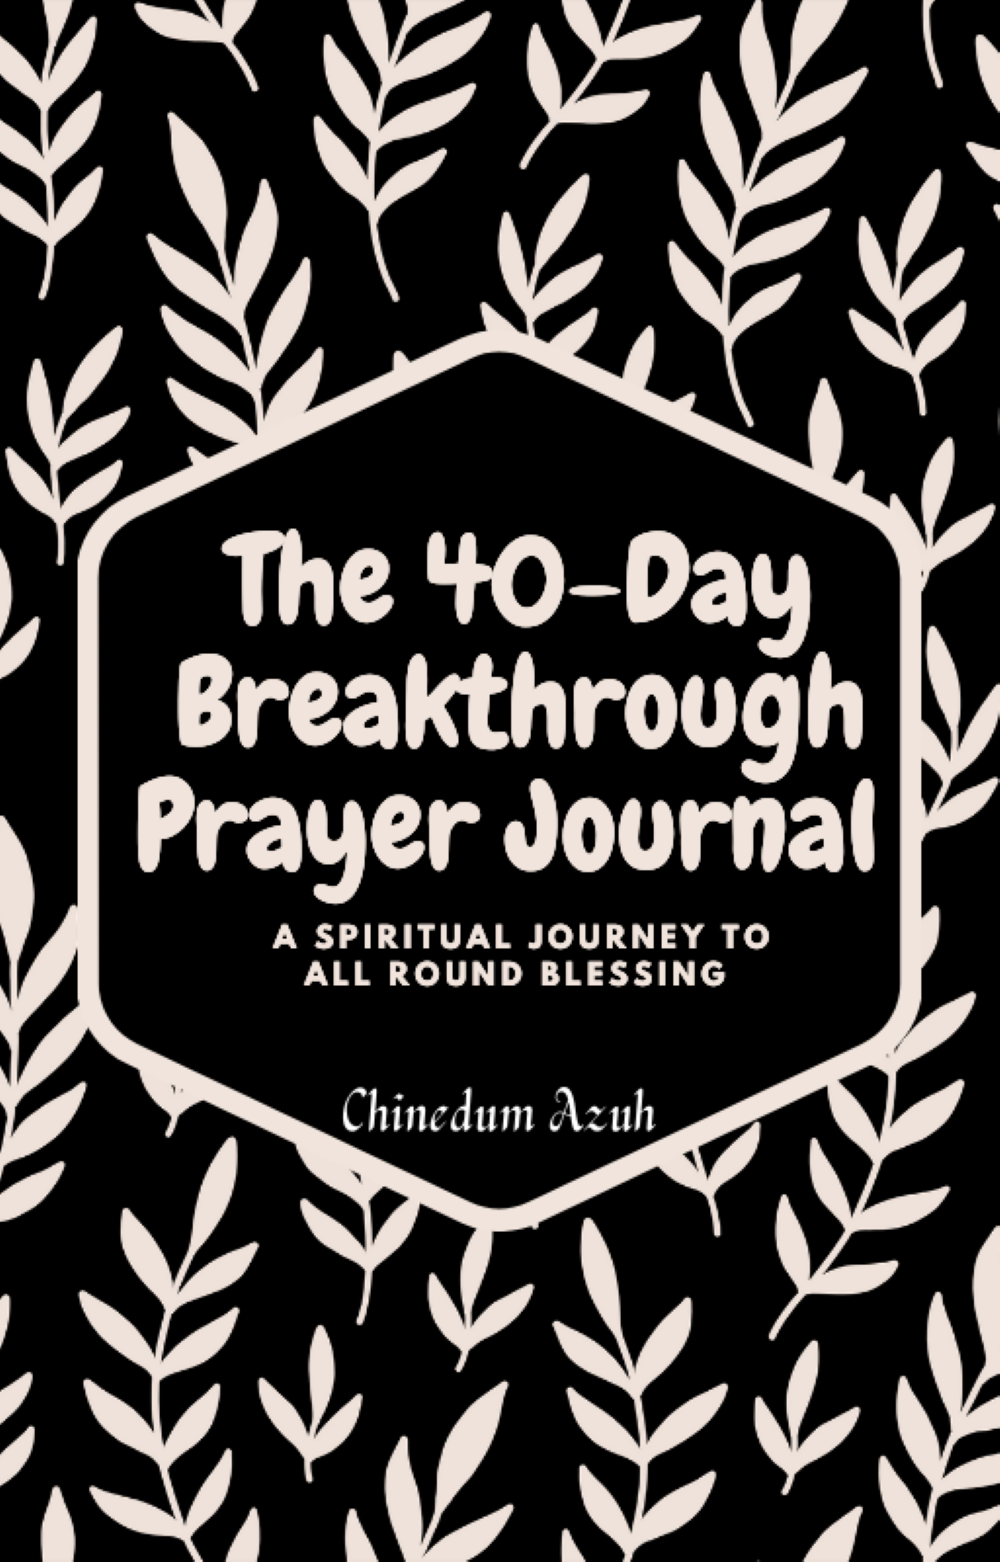 FREE: The 40-Day Breakthrough Prayer Journal : A Spiritual Journey to All round Blessing by Chinedum Azuh